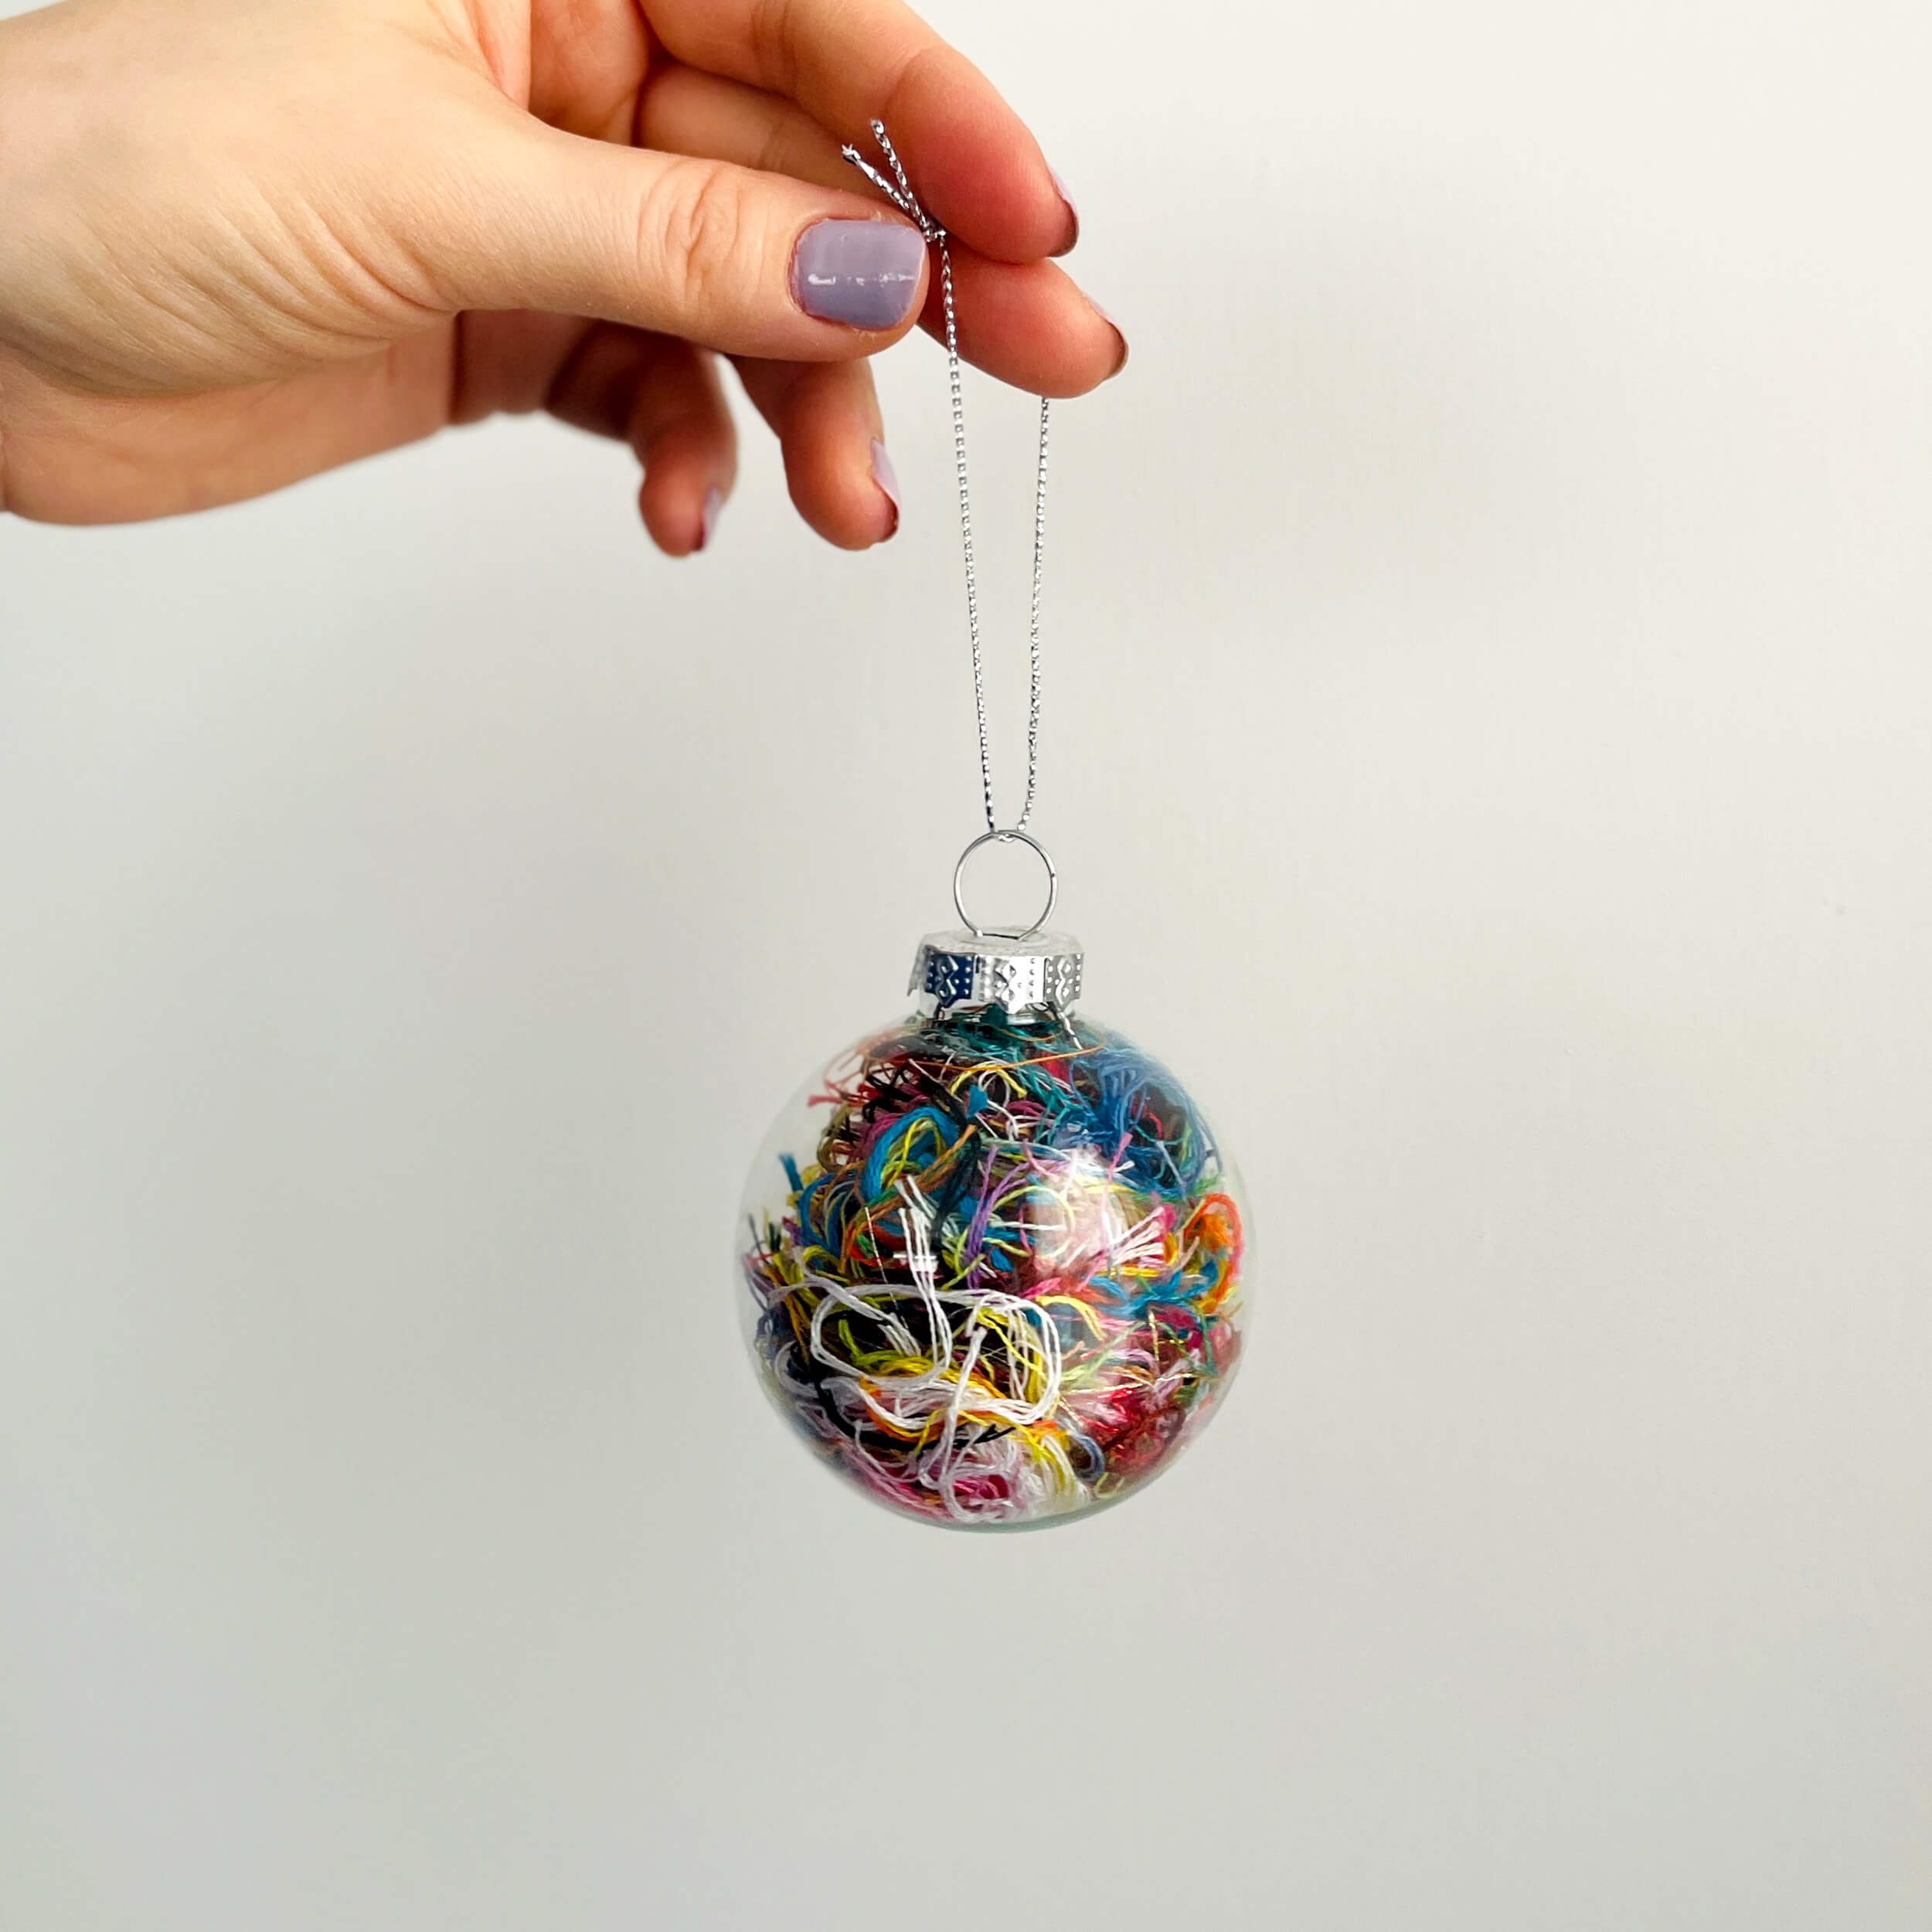 Hand holding a clear christmas ornament filled with scrap embroidery floss in all colors